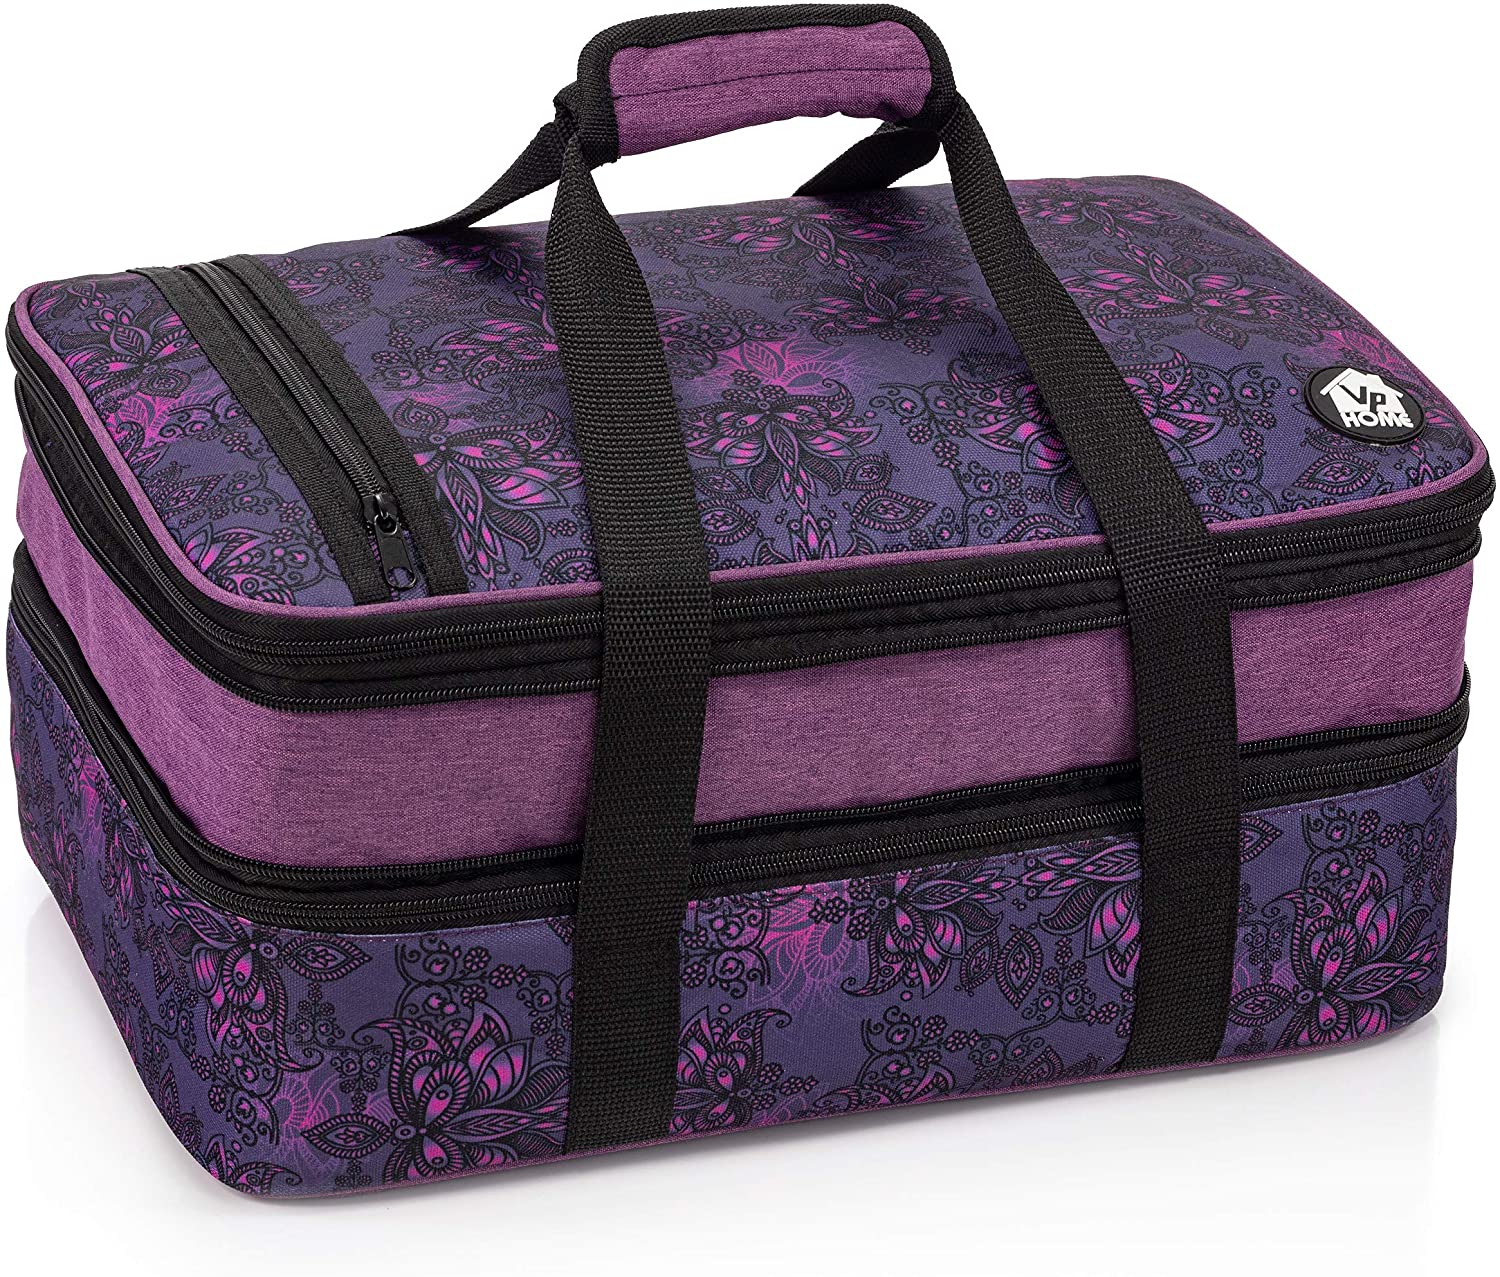 Review of - VP Home Double Casserole Insulated Travel Carry Bag (Henna Tattoo)